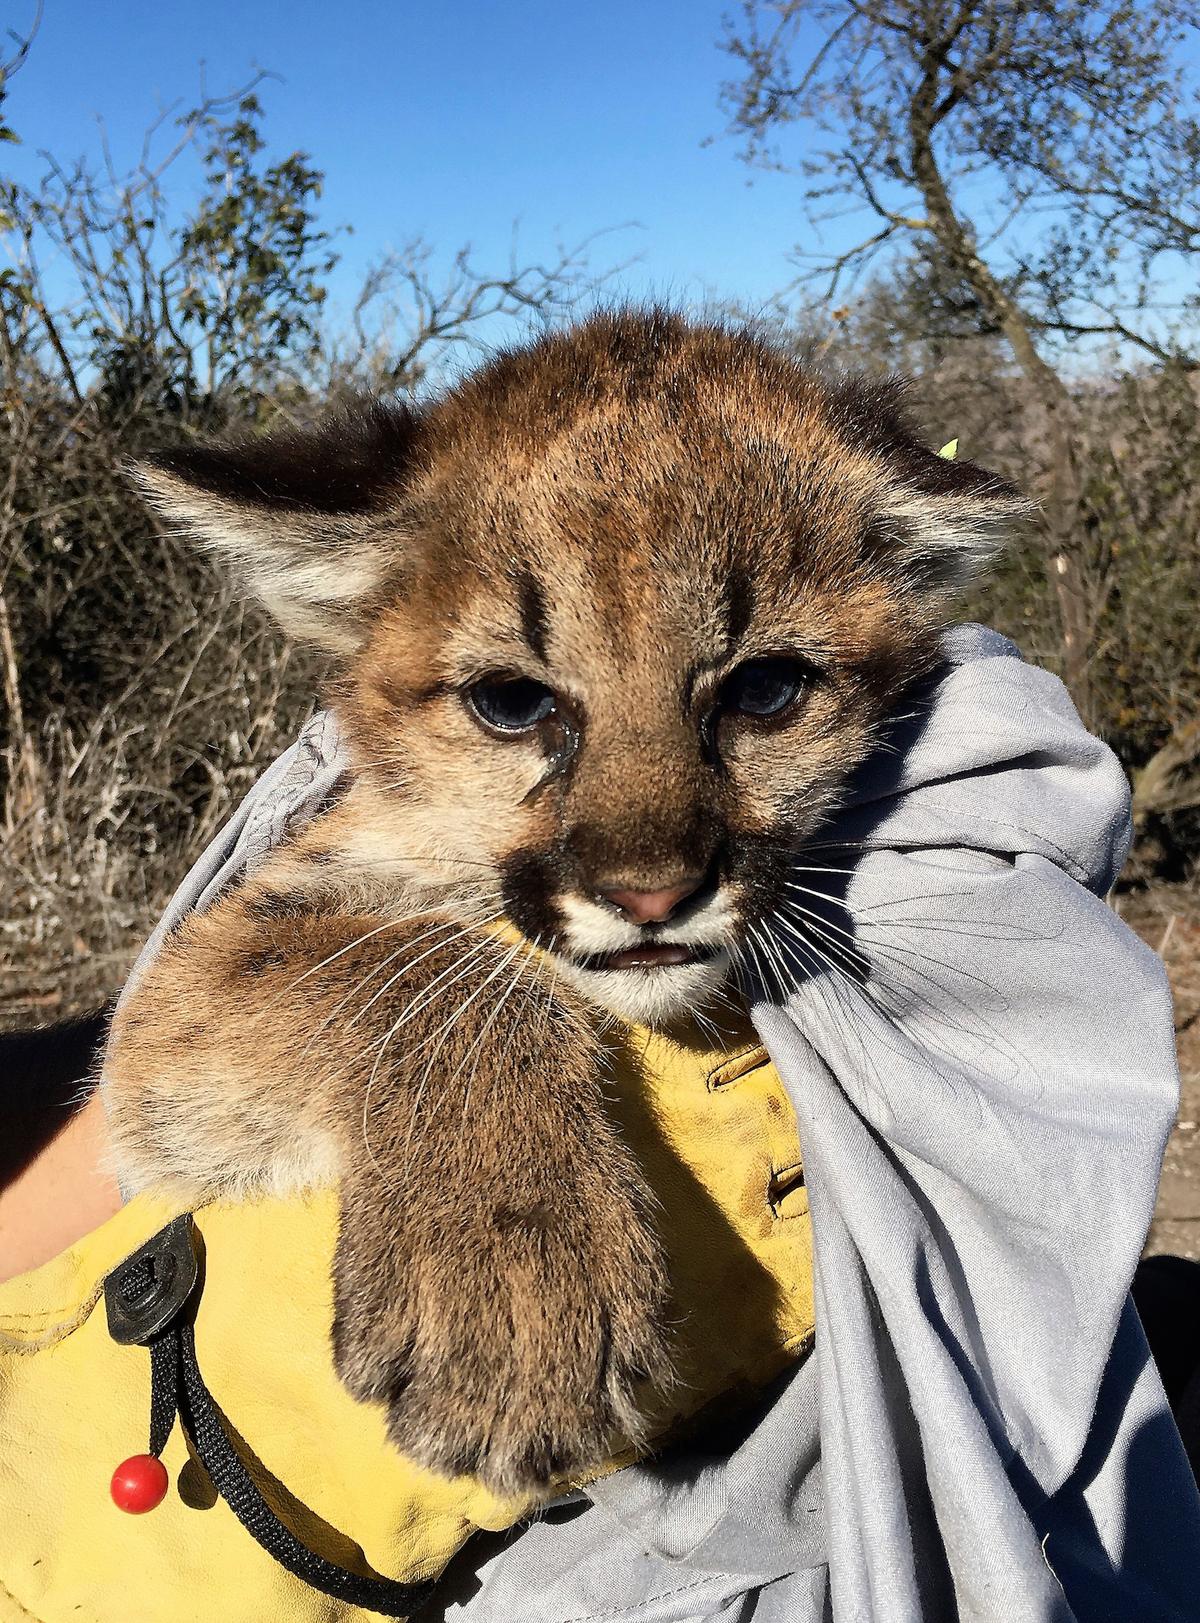 A mountain lion kitten that was discovered in Thousand Oaks, Calif., on Nov. 30, 2021. (National Park Service via AP)